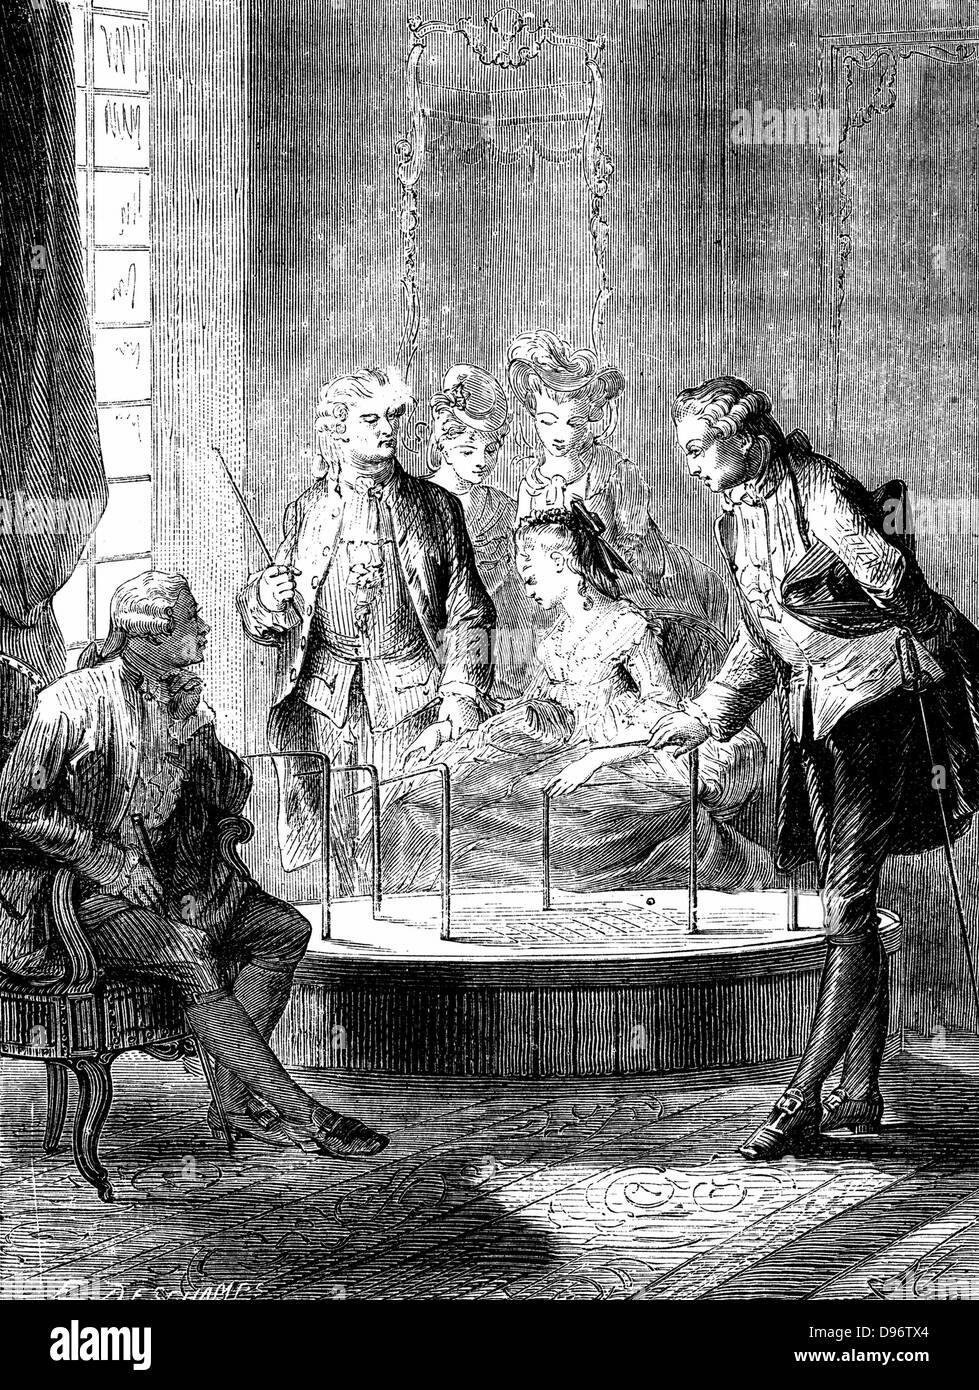 Mesmer's tub at his consulting room in parish which opened soon after his treatise 'Memoire sur la decouverte de magnetism animal' in 1779. Tub was a vat of dilute sulphuric acid and patients at therapy sessions sat around it either holding hands, or holding one of the iron bars projecting from it. Illustration published Paris c1870. Stock Photo